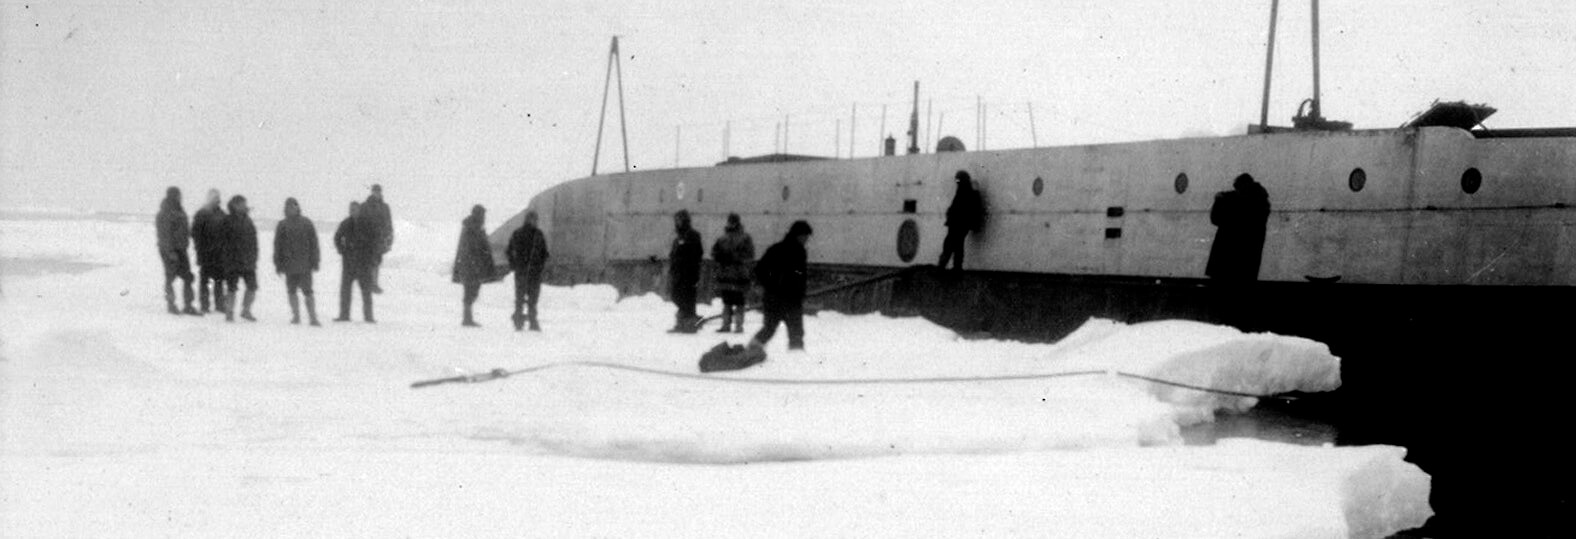 1931: The submarine Nautilus and crew on the Wilkins-Ellsworth Trans-Arctic Expedition